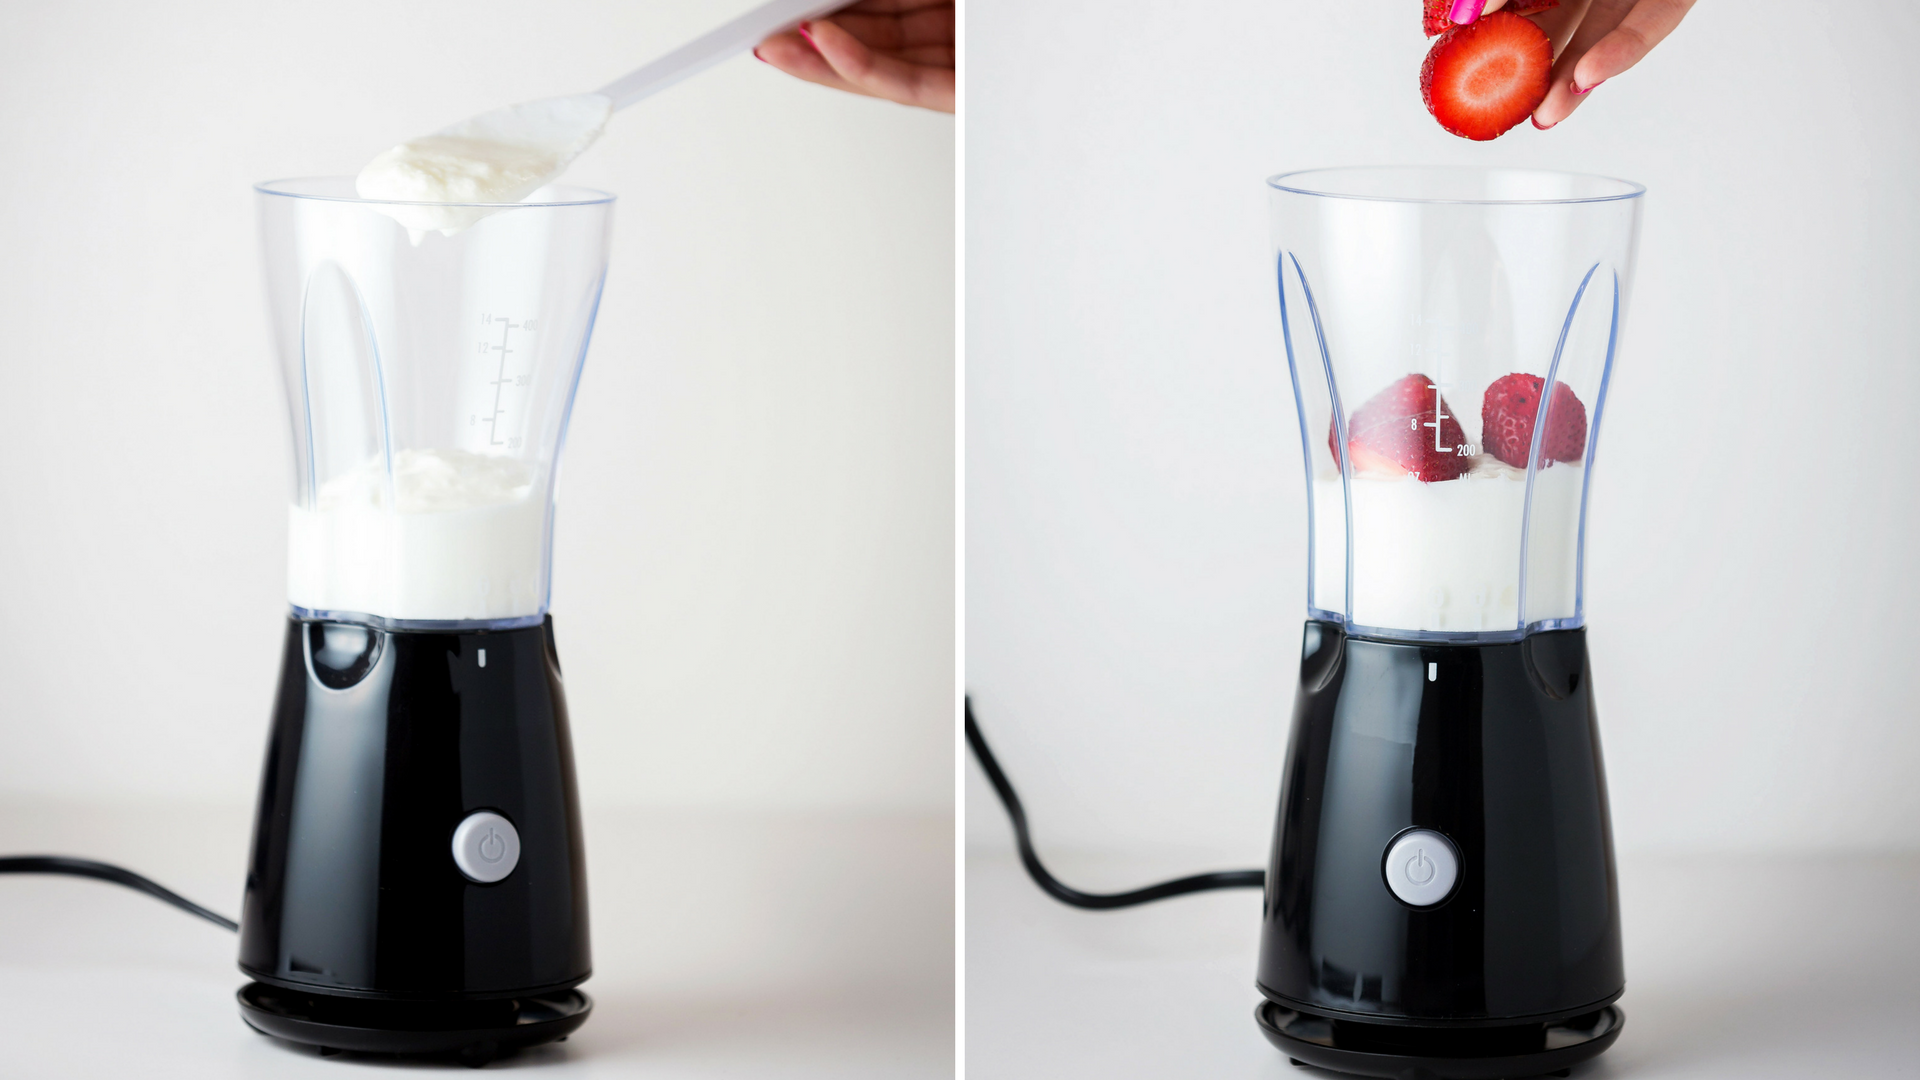 Yogurt and strawberries are put into a blender